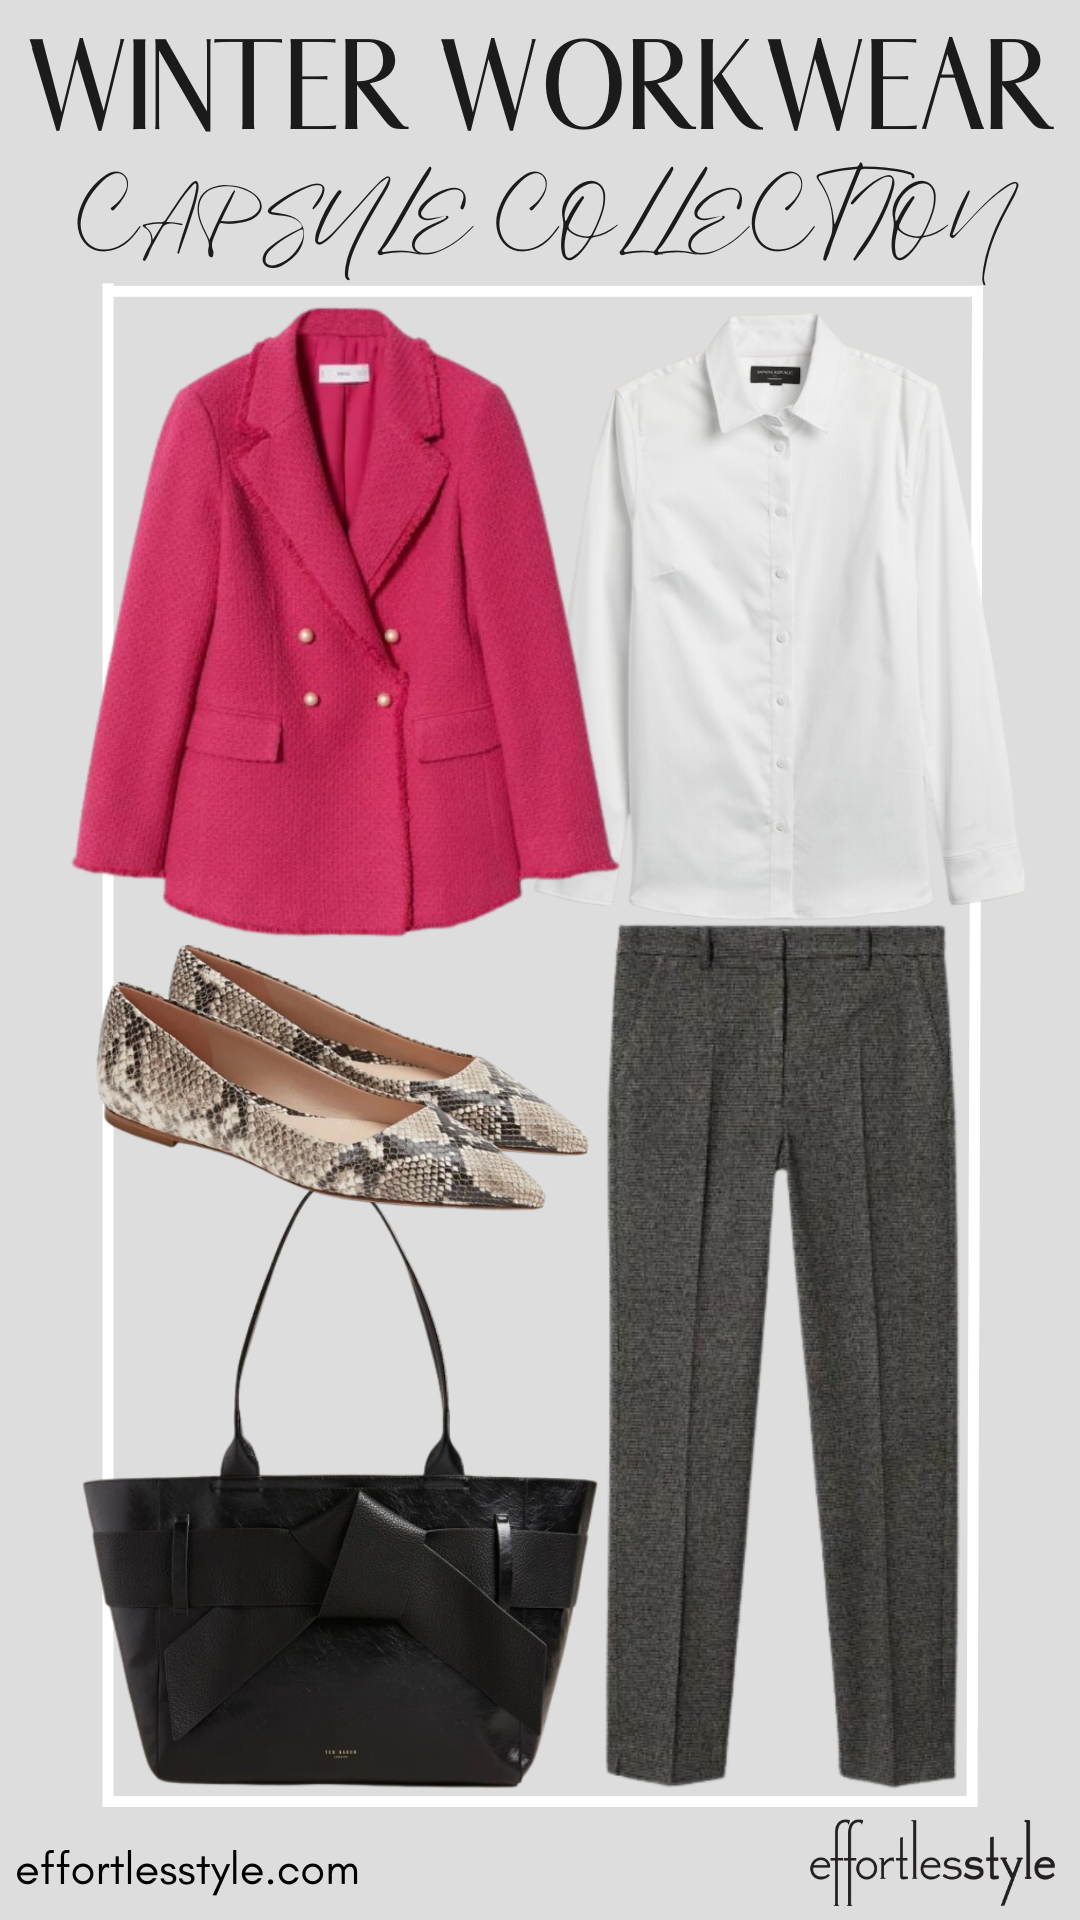 How To Wear Our Winter Workwear Capsule Wardrobe - Part 1 Statement Blazer & Button-Up Shirt & Ankle Pants how to wear ankle pants for work how to wear ankle pants with a blazer how to style snakeskin shoes how to style snake print shoes how to wear a button-up shirt